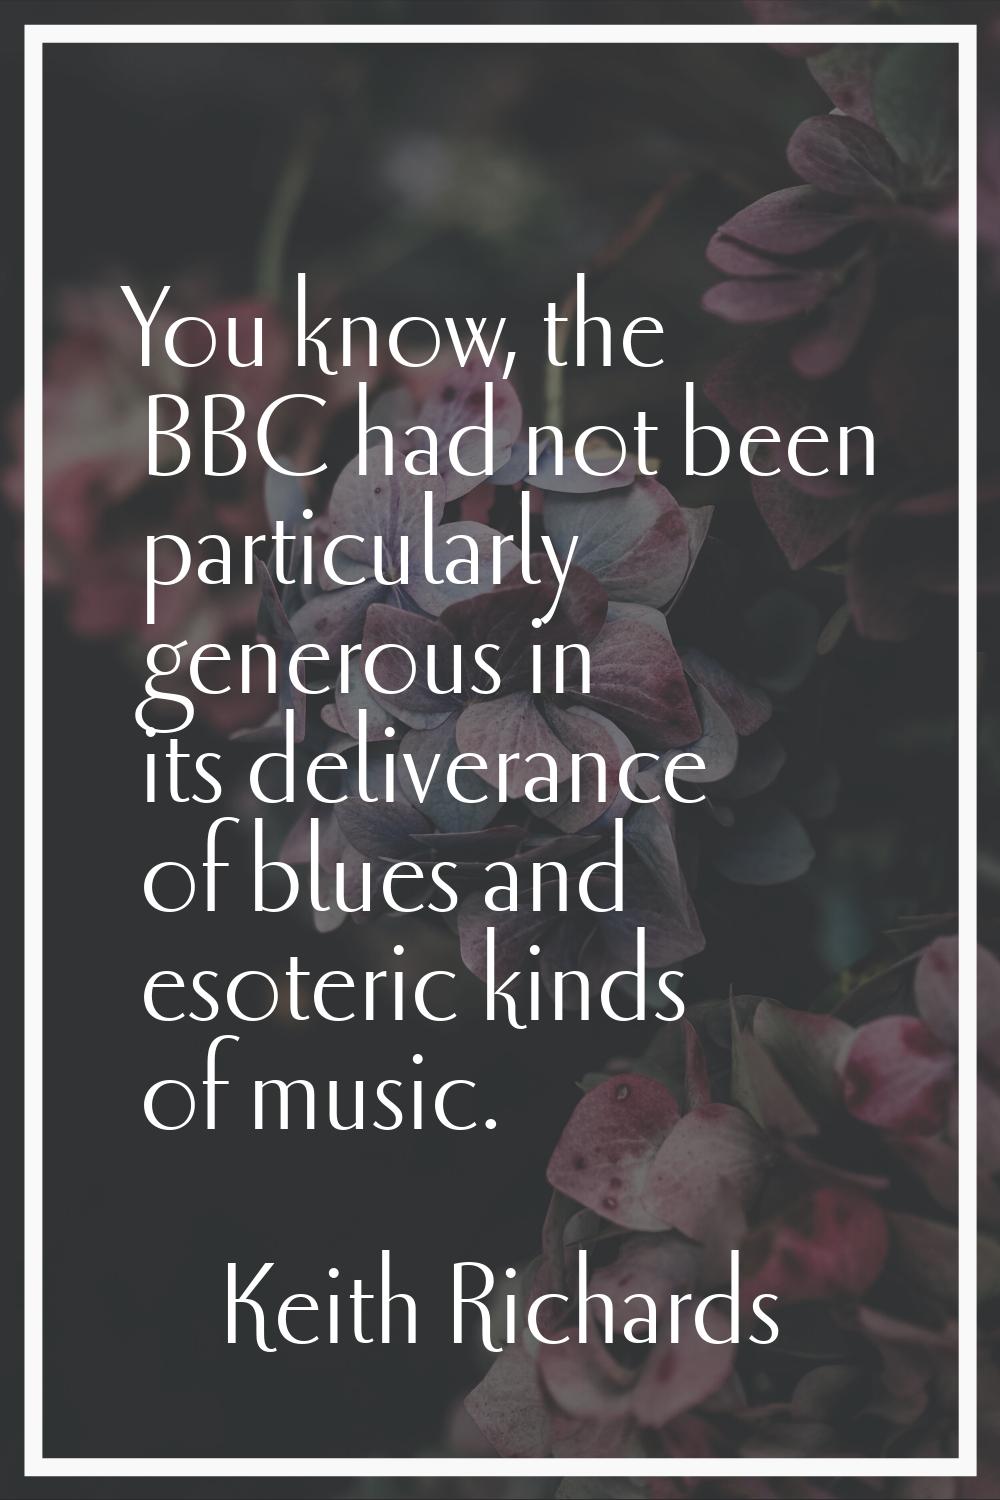 You know, the BBC had not been particularly generous in its deliverance of blues and esoteric kinds